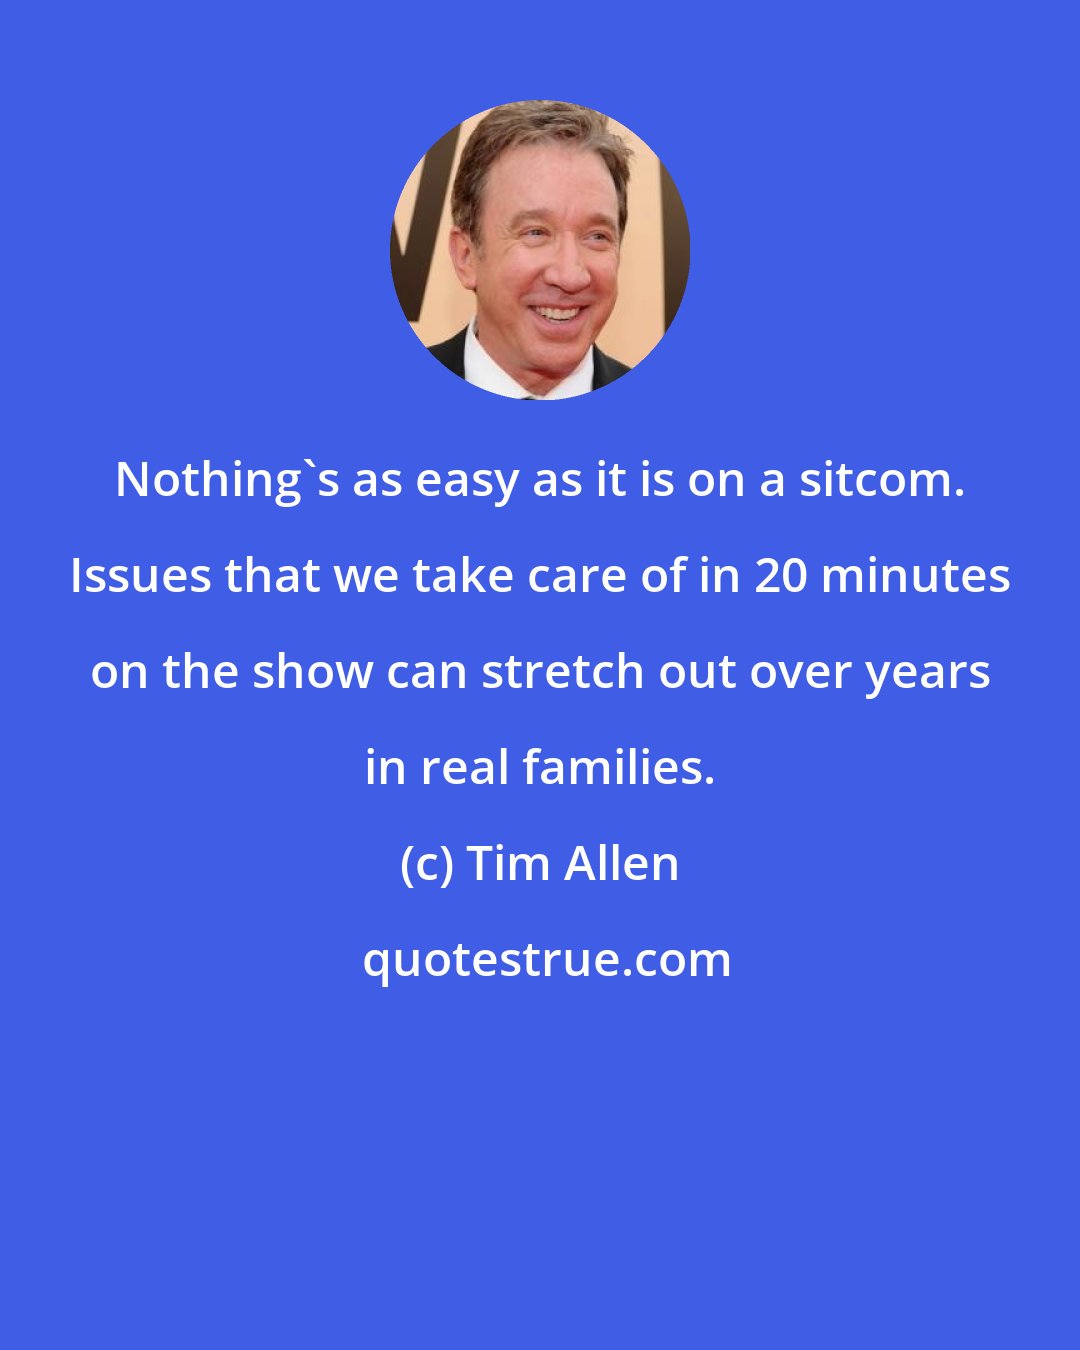 Tim Allen: Nothing's as easy as it is on a sitcom. Issues that we take care of in 20 minutes on the show can stretch out over years in real families.